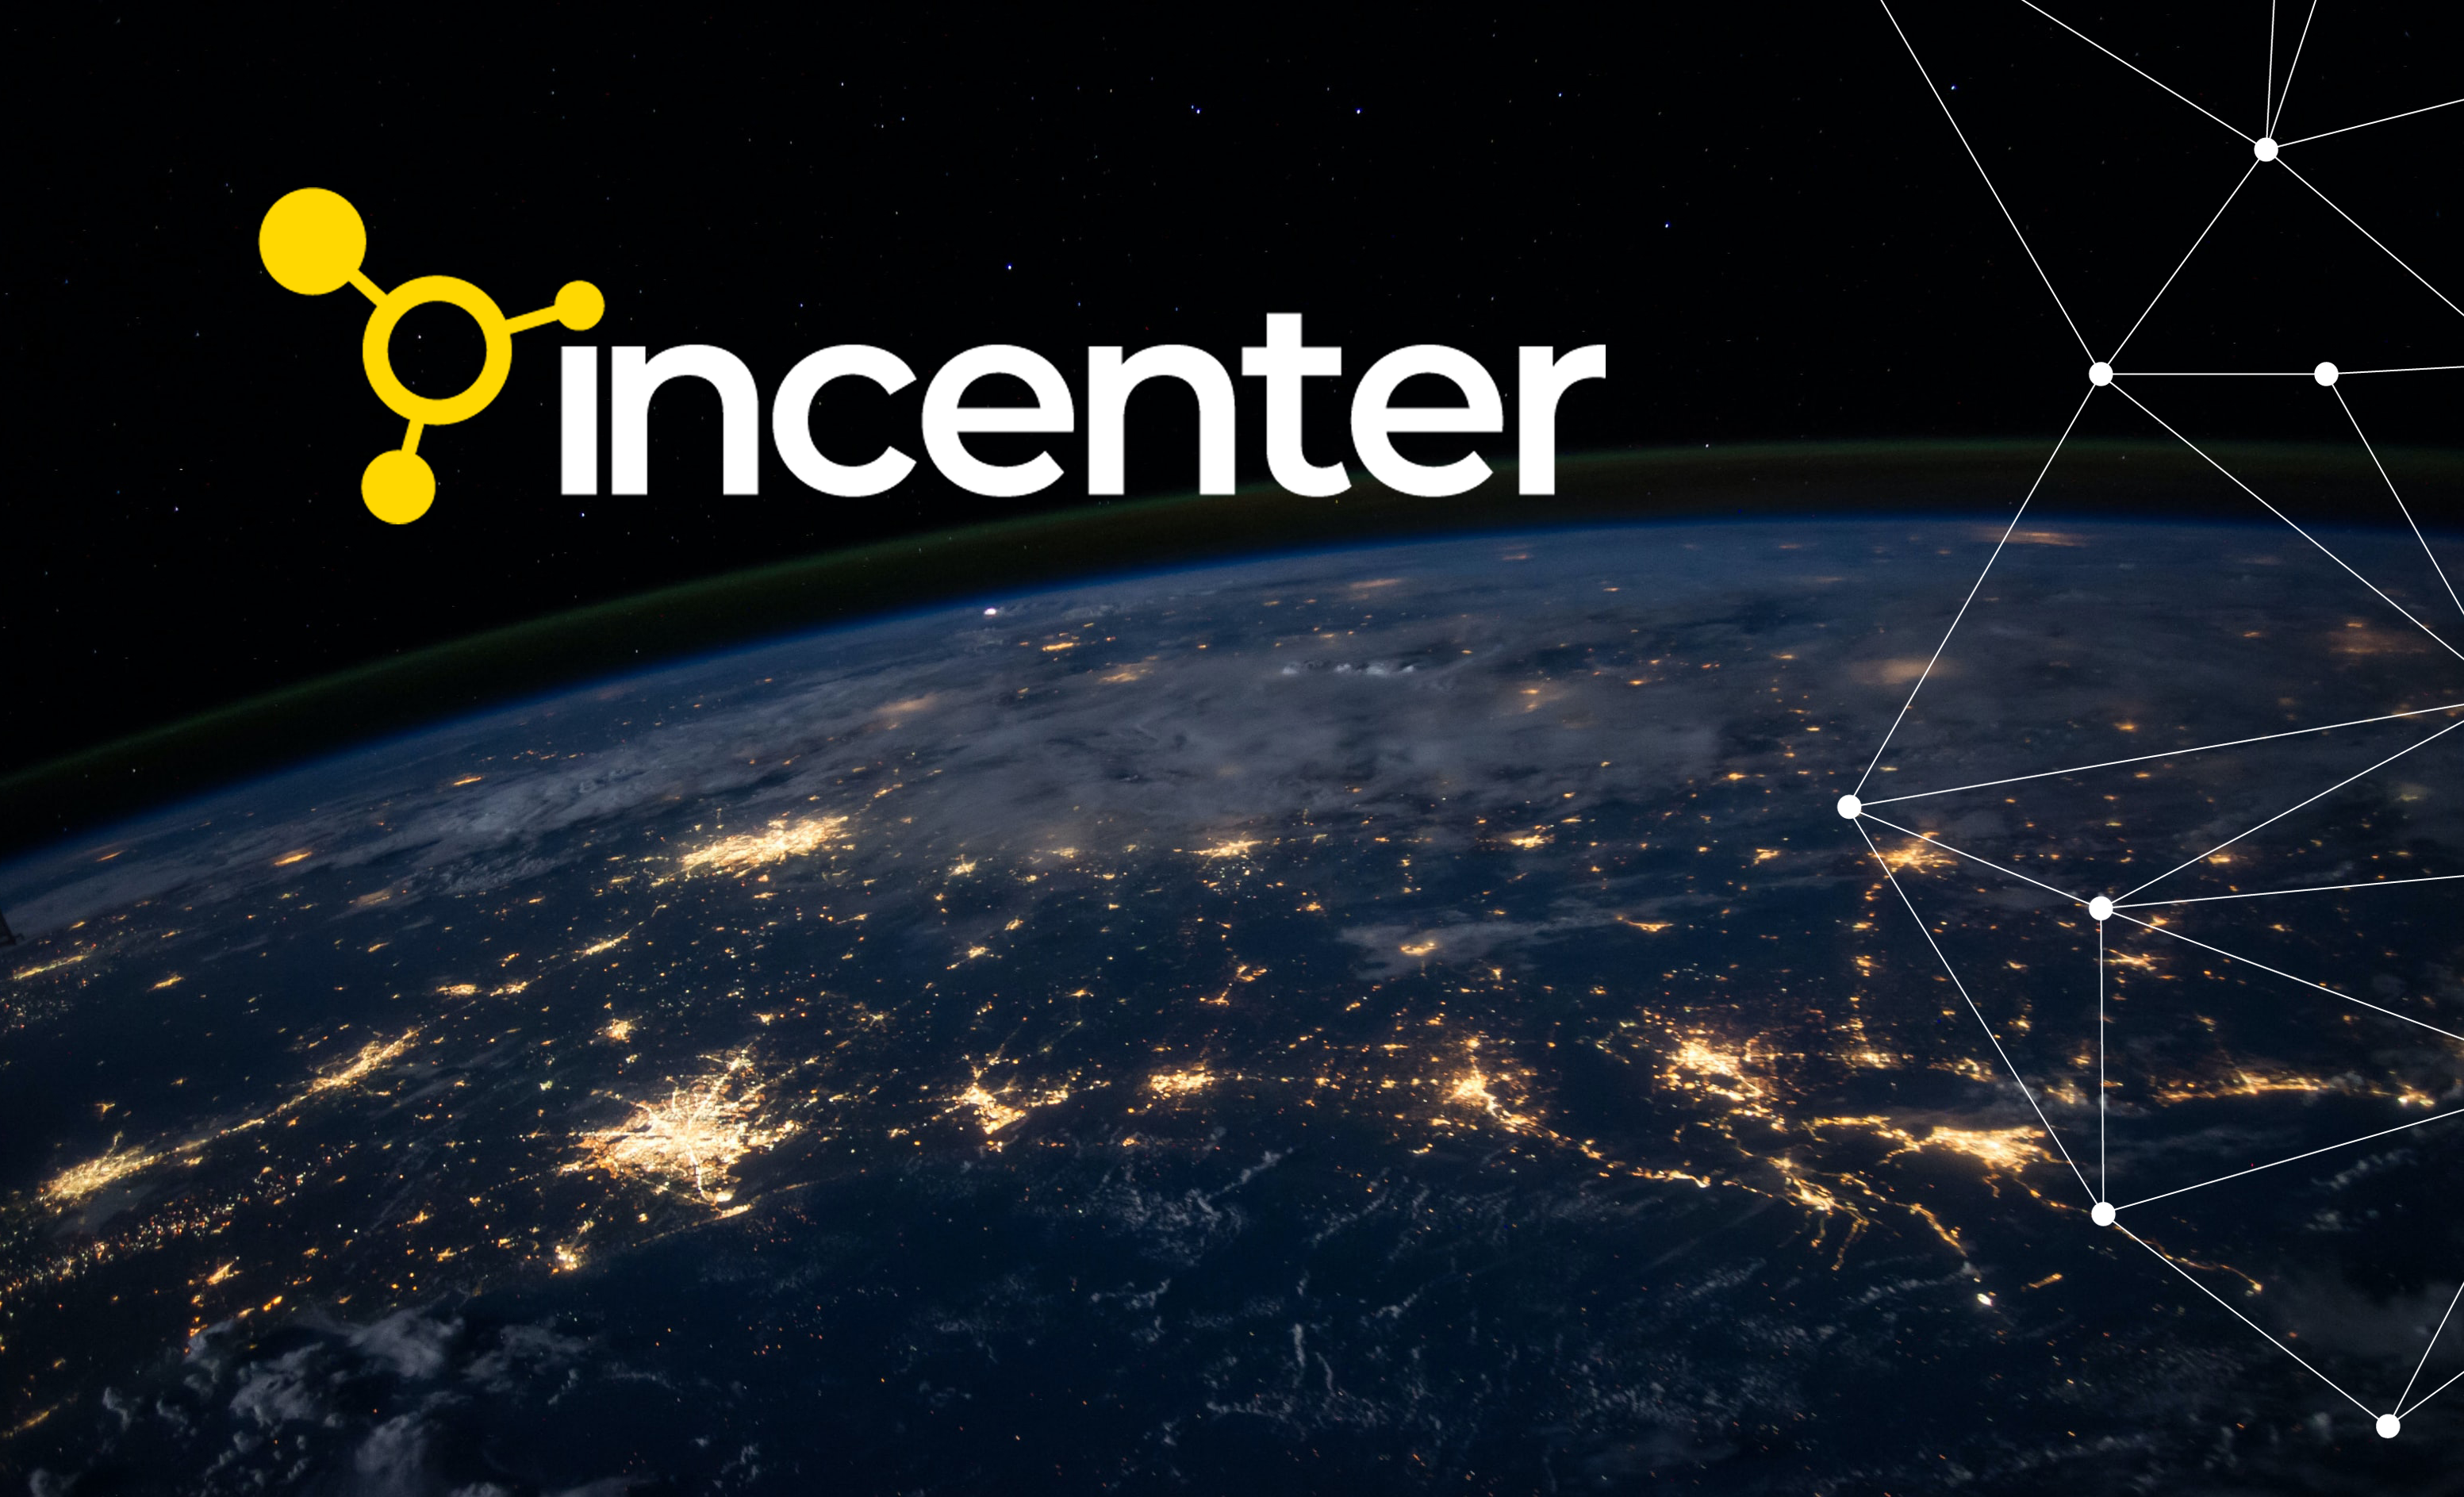 Major Incenter updates  cover mobile, API, cloud and more